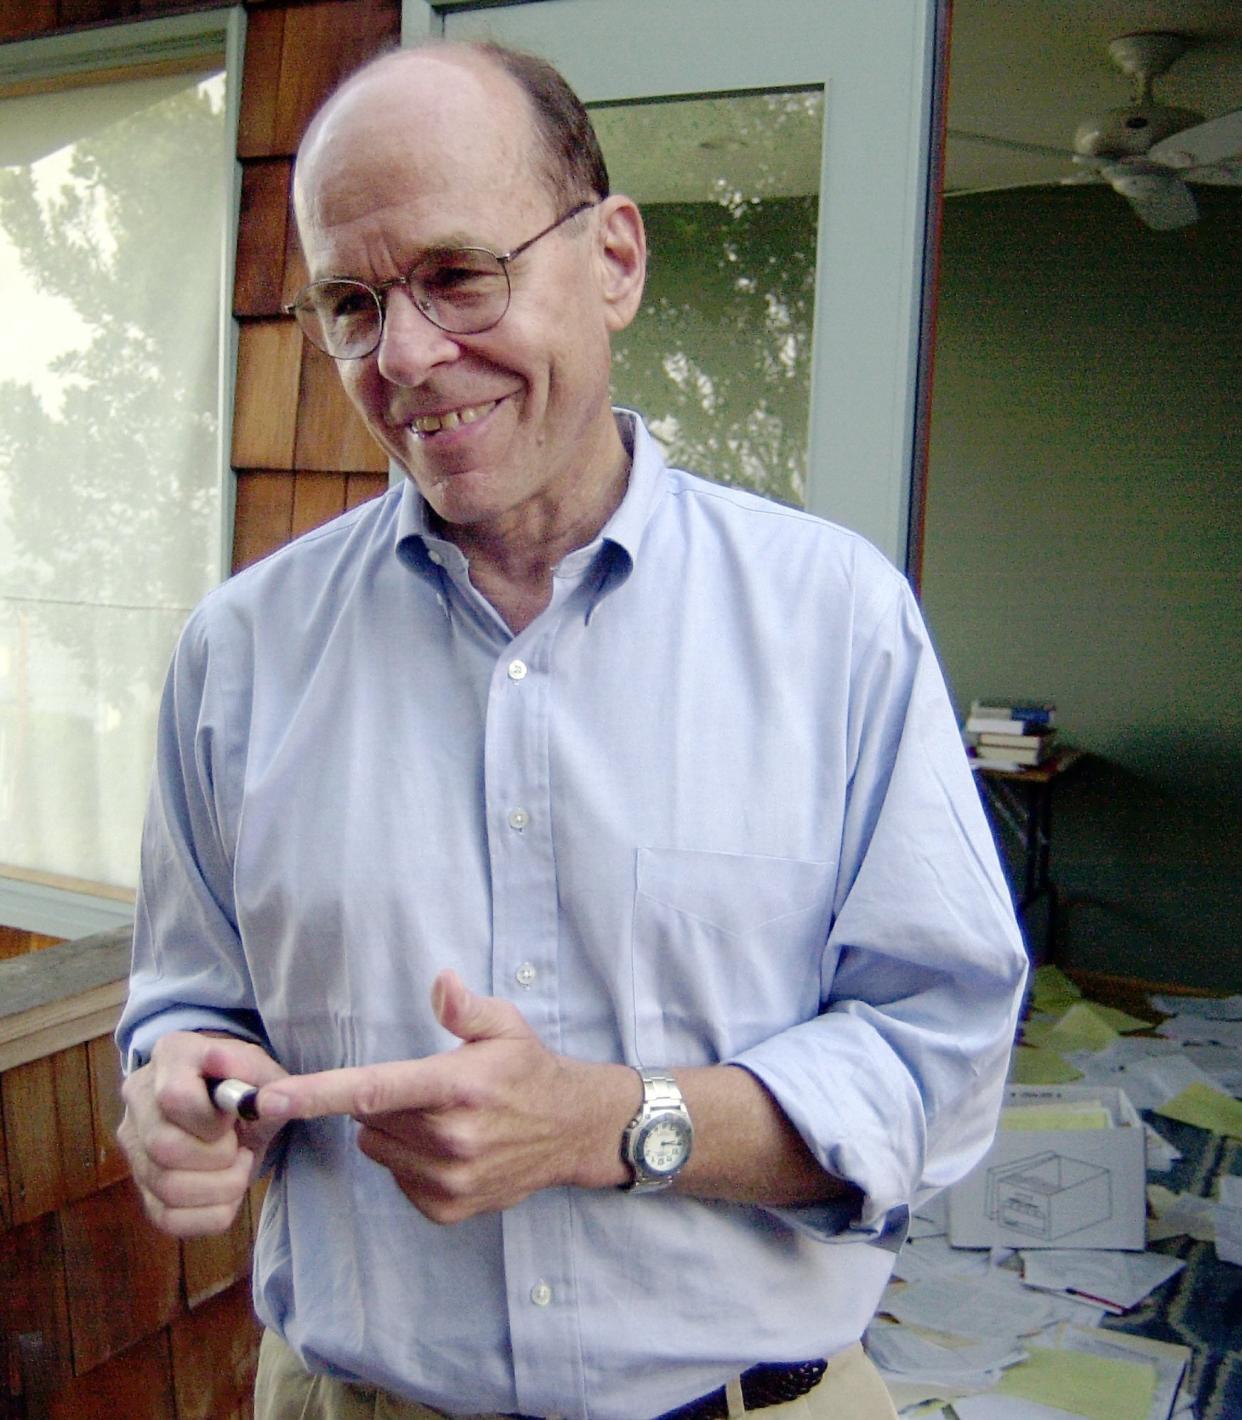 FILE - K. Barry Sharpless points to a sample used in his work, as he stands on the balcony outside of his home office in La Jolla, Calif. on Oct. 10, 2001. This year’s Nobel Prize in chemistry has been awarded in equal parts to Carolyn R. Bertozzi, Morten Meldal and K. Barry Sharpless for developing way of “snapping molecules together.” (AP Photo/Denis Poroy)